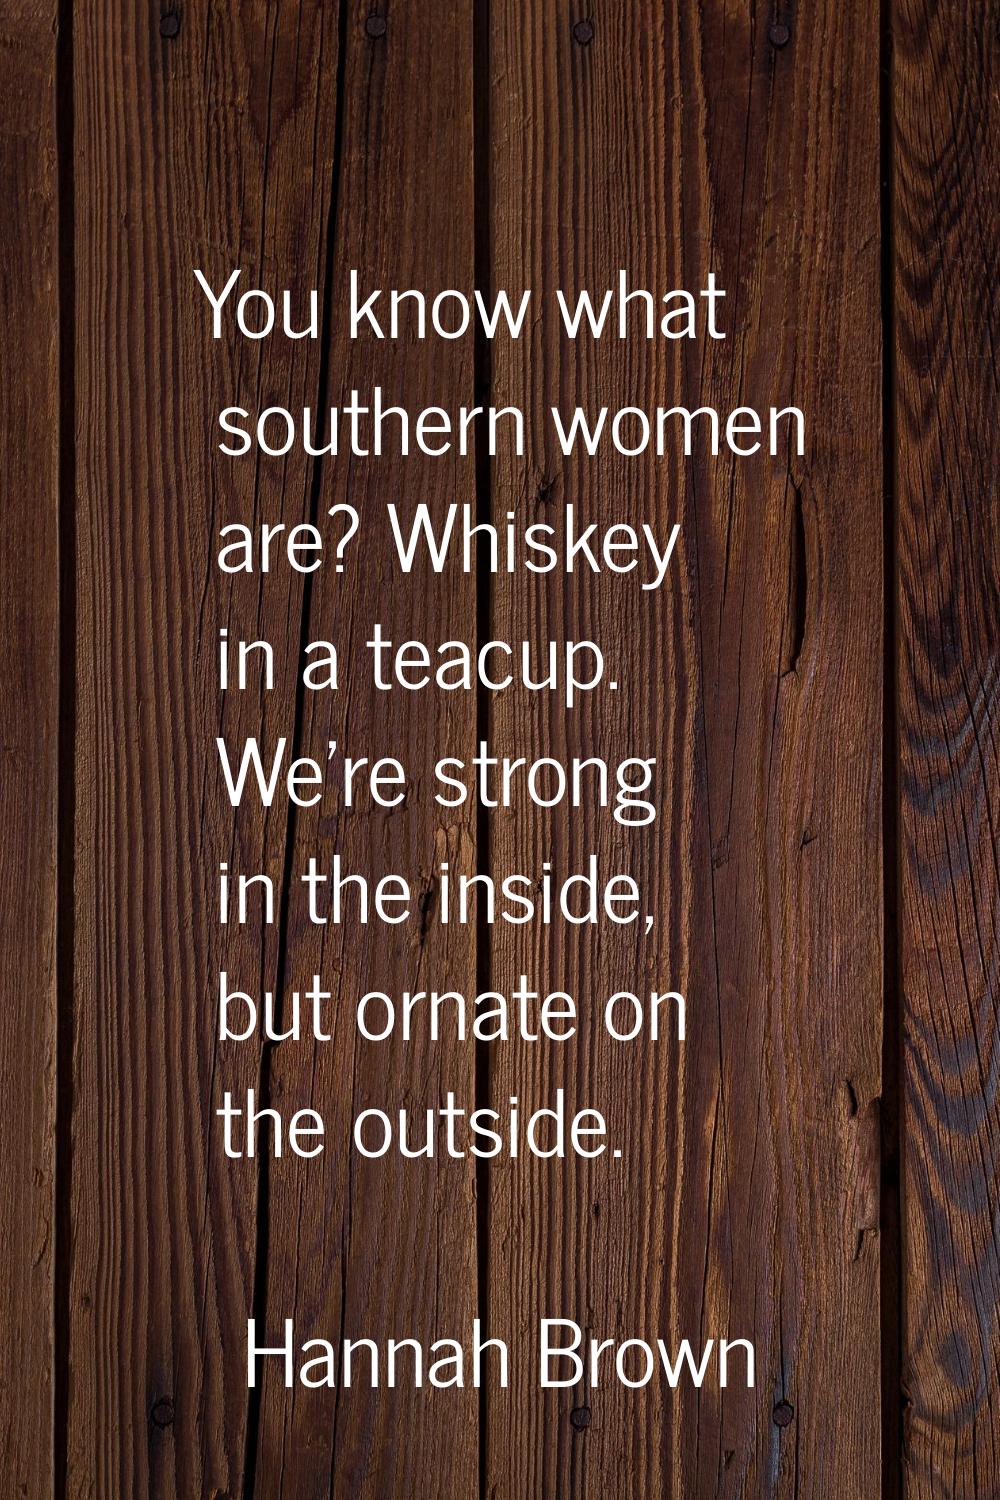 You know what southern women are? Whiskey in a teacup. We're strong in the inside, but ornate on th